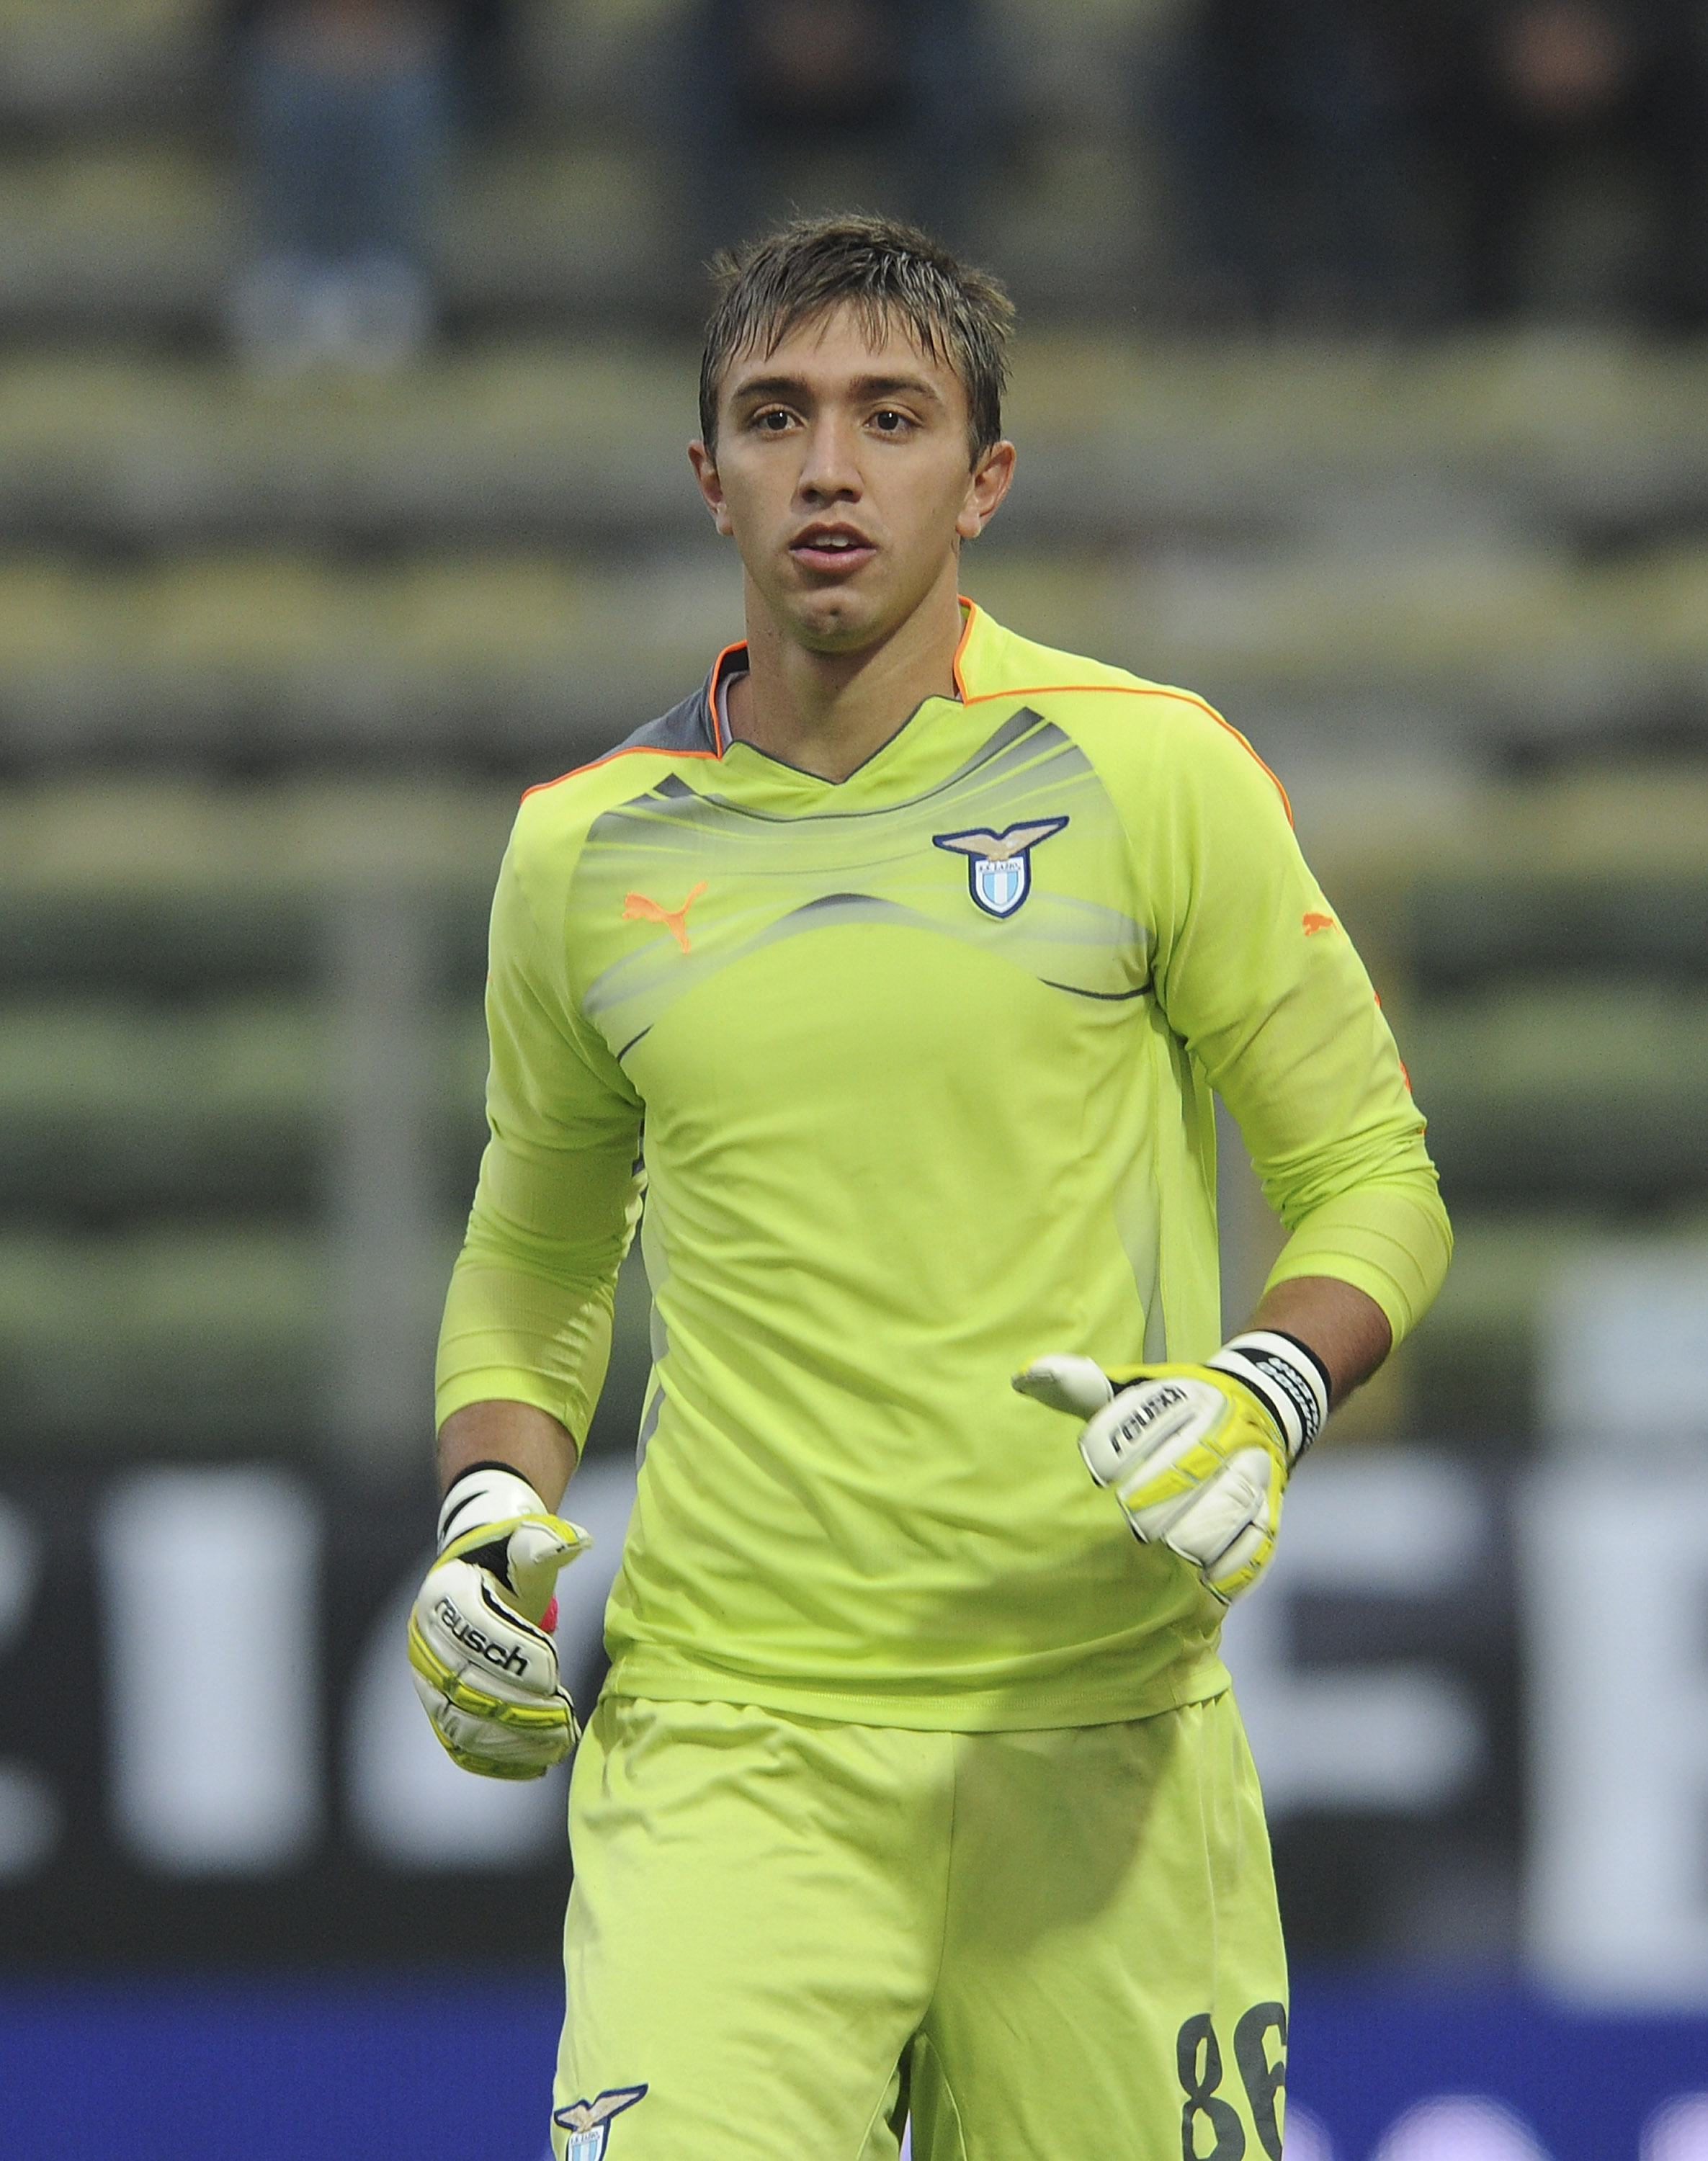 PARMA, ITALY - NOVEMBER 21:  Fernando Muslera, goalkeeper of Lazio looks on during the Serie A match between Parma and Lazio at Stadio Ennio Tardini on November 21, 2010 in Parma, Italy.  (Photo by Dino Panato/Getty Images)